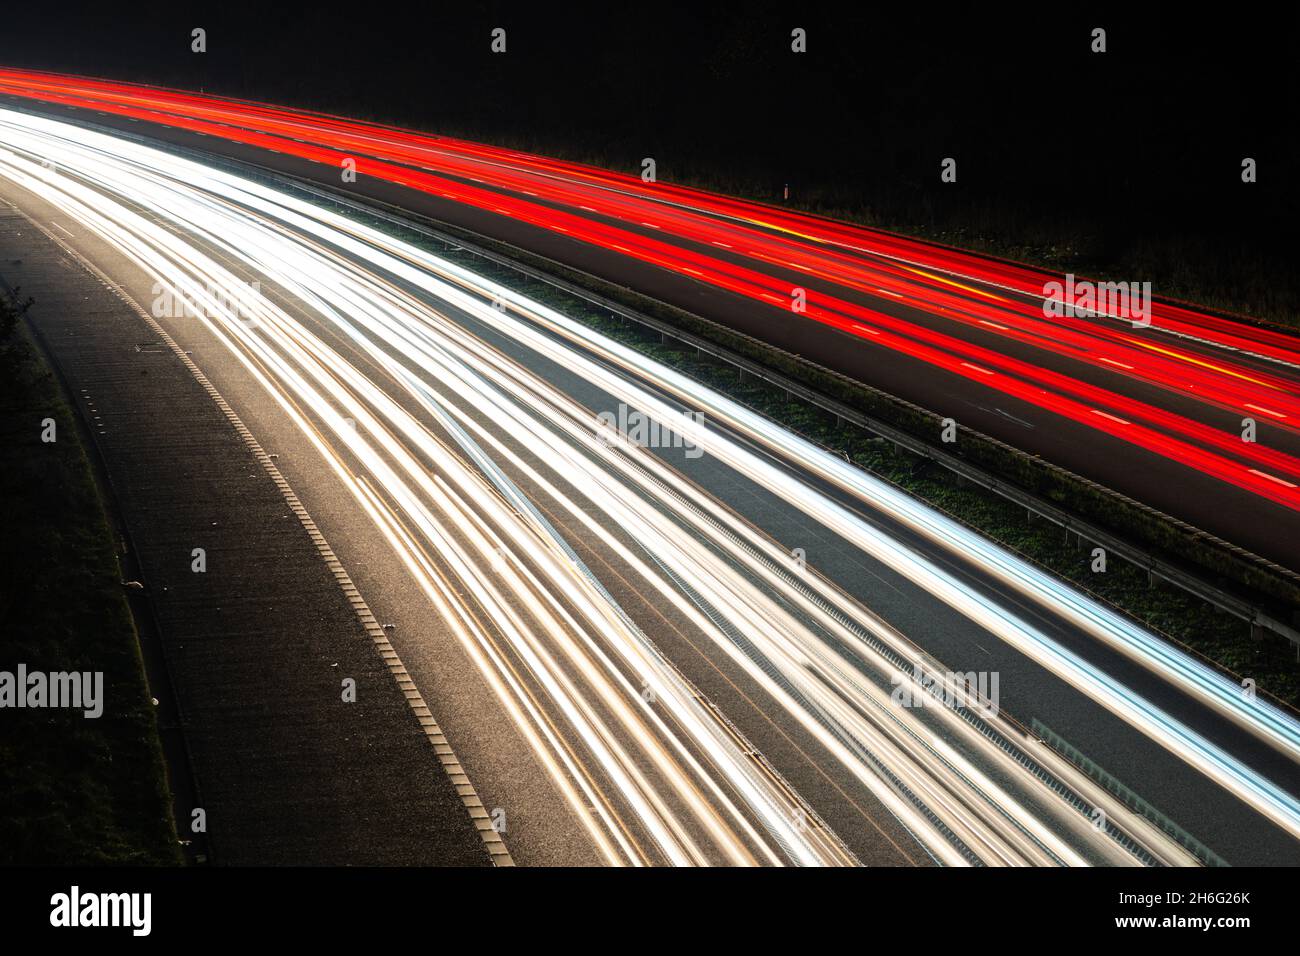 Light trails from a busy motorway or highway at night showing motion of traffic at rush hour. Traffic appears to drive on the right Stock Photo